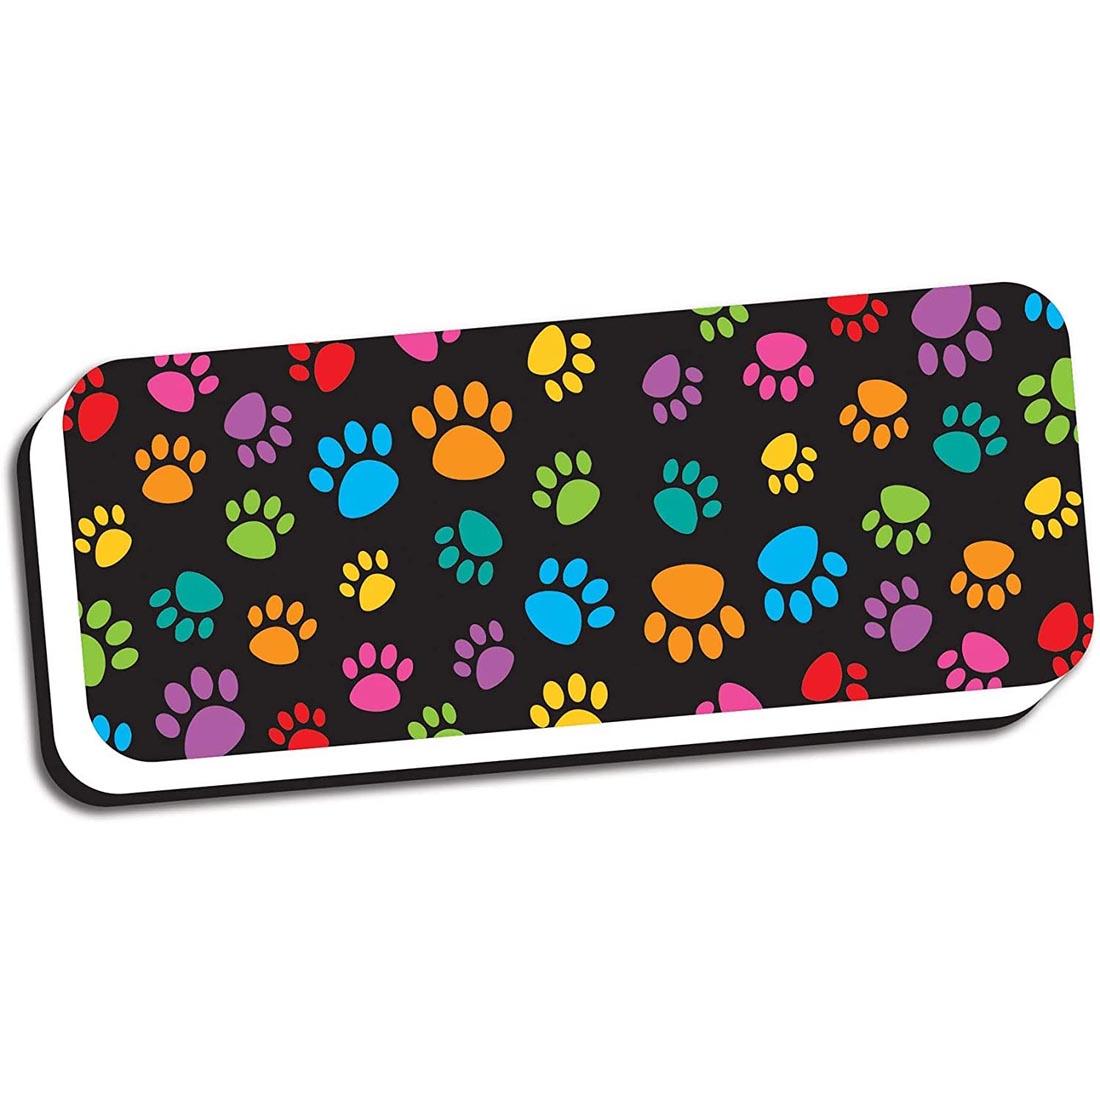 Magnetic Whiteboard Eraser with colorful paw prints by Ashley